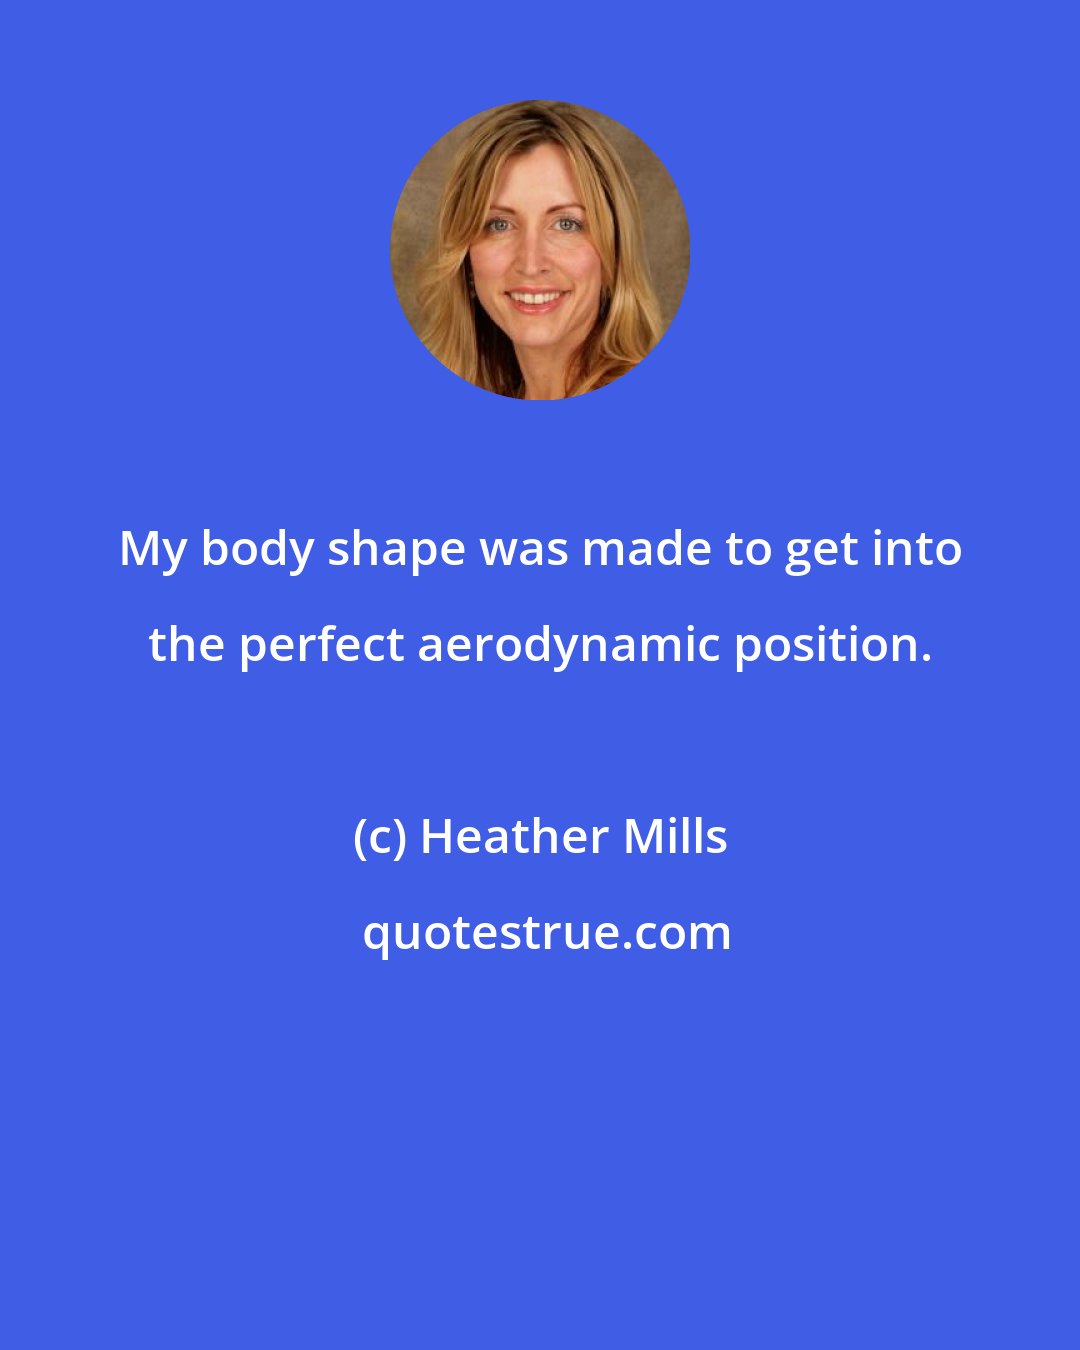 Heather Mills: My body shape was made to get into the perfect aerodynamic position.